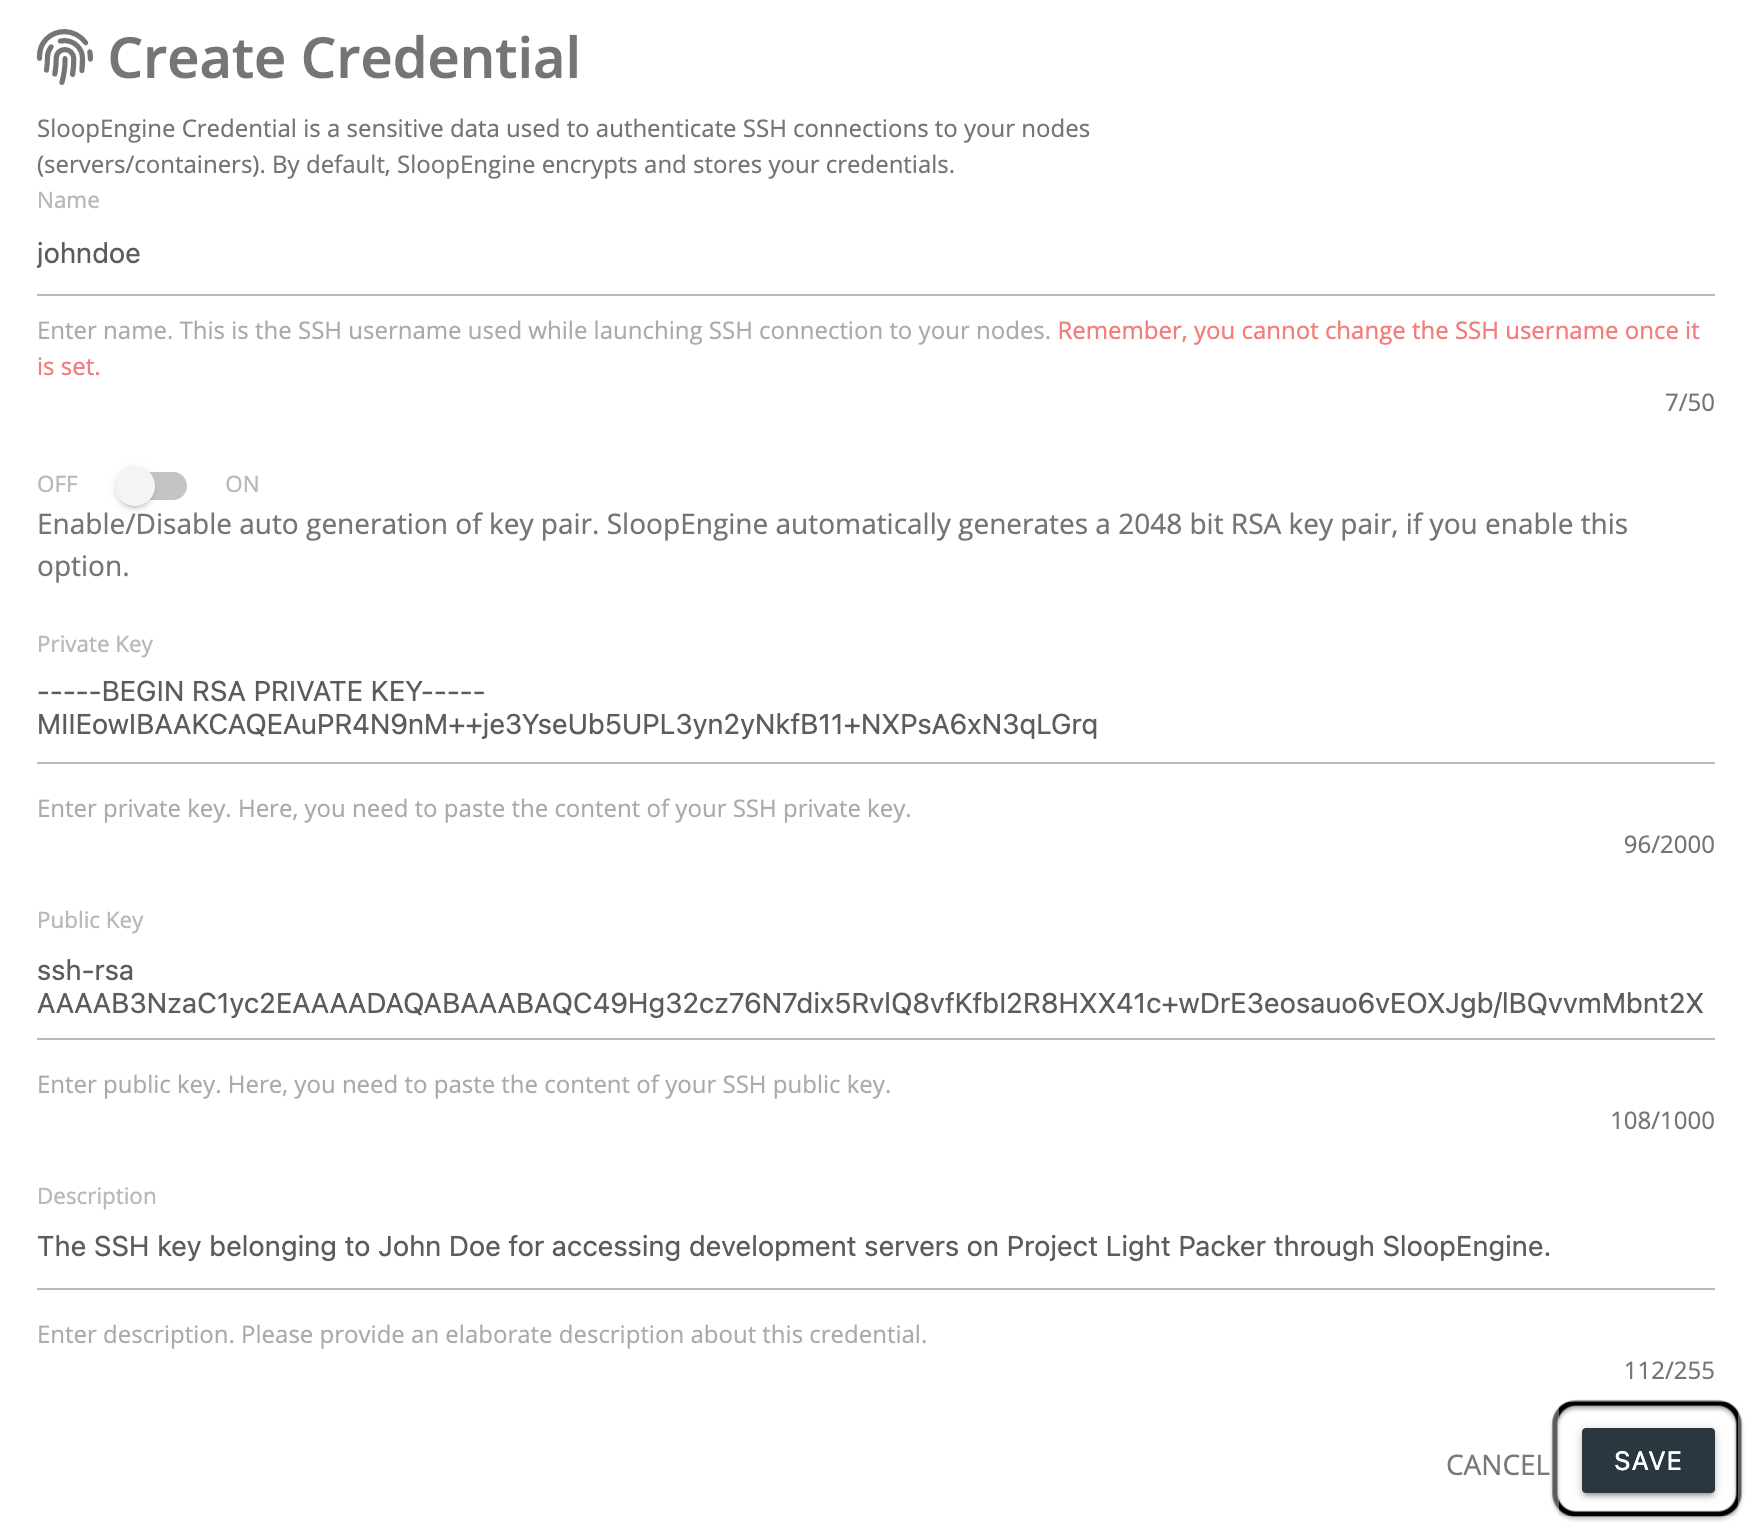 Screenshot of credential creation form with valid information.